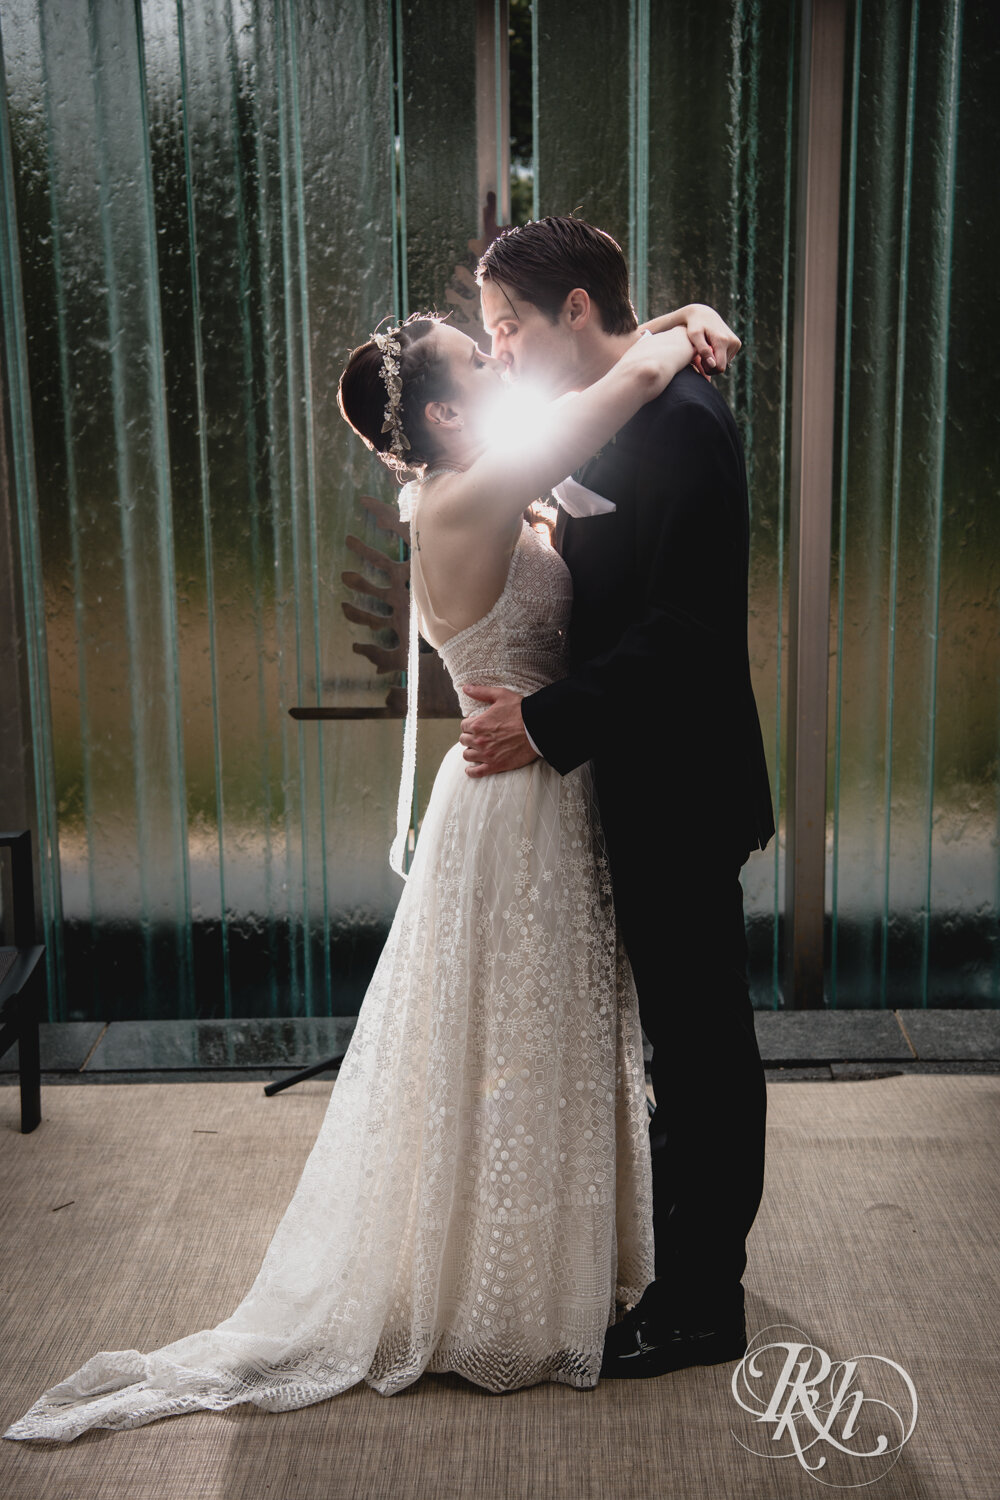 Bride and groom kiss at Olympic Hills Golf Club in Eden Prairie, Minnesota.